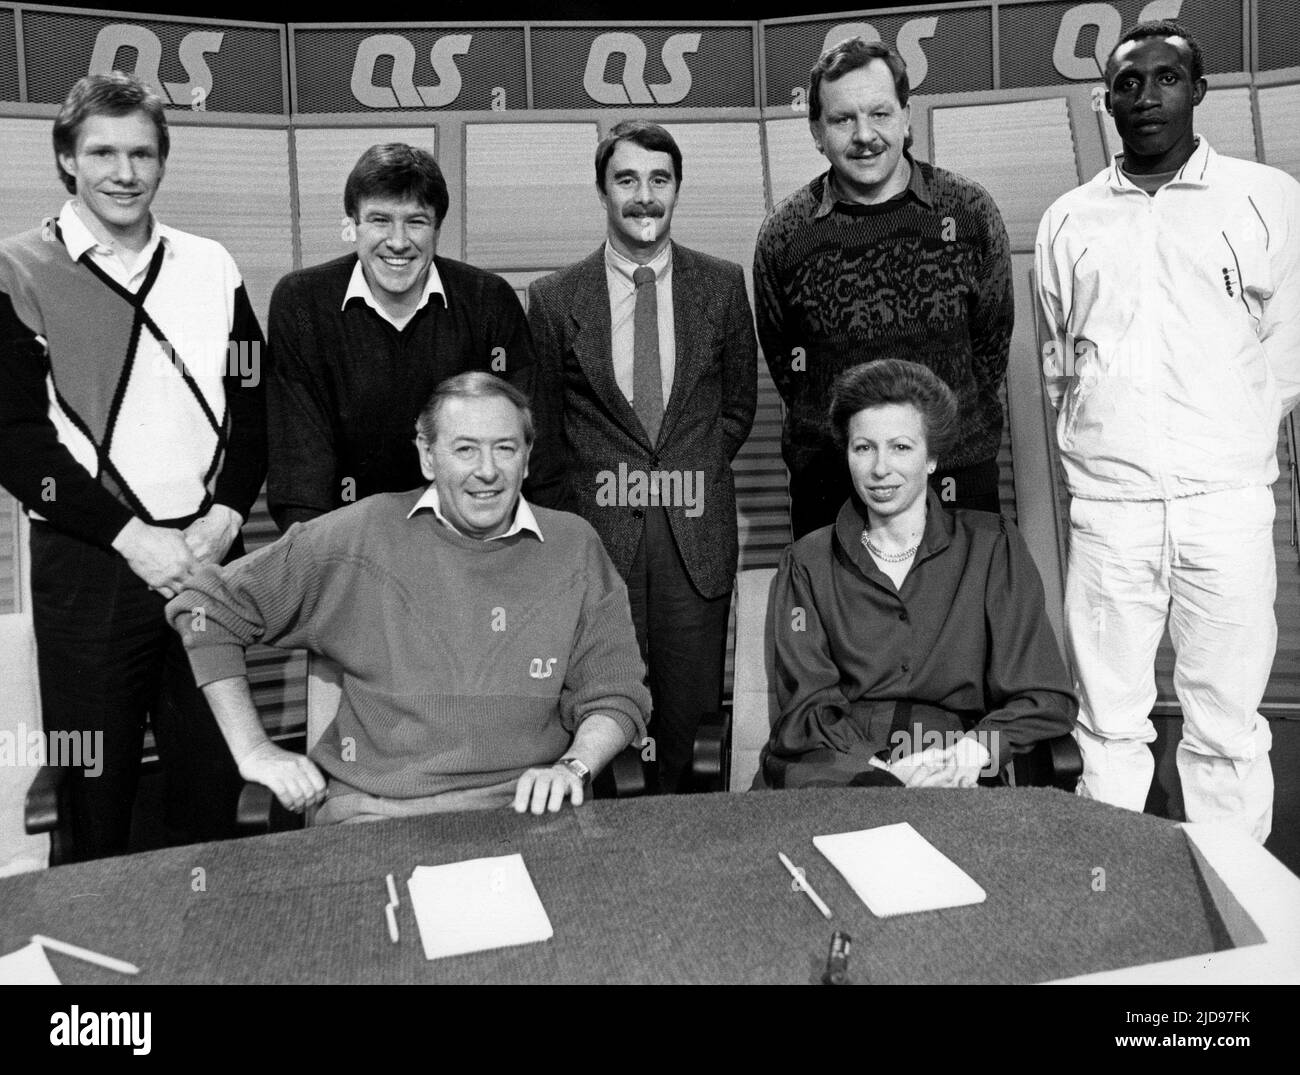 RUTHERFORD,HUGHES,MANSELL,BEAUMONT,CHRISTIE,COLEMAN,ANNE, A QUESTION OF SPORT, 1987, Stock Photo